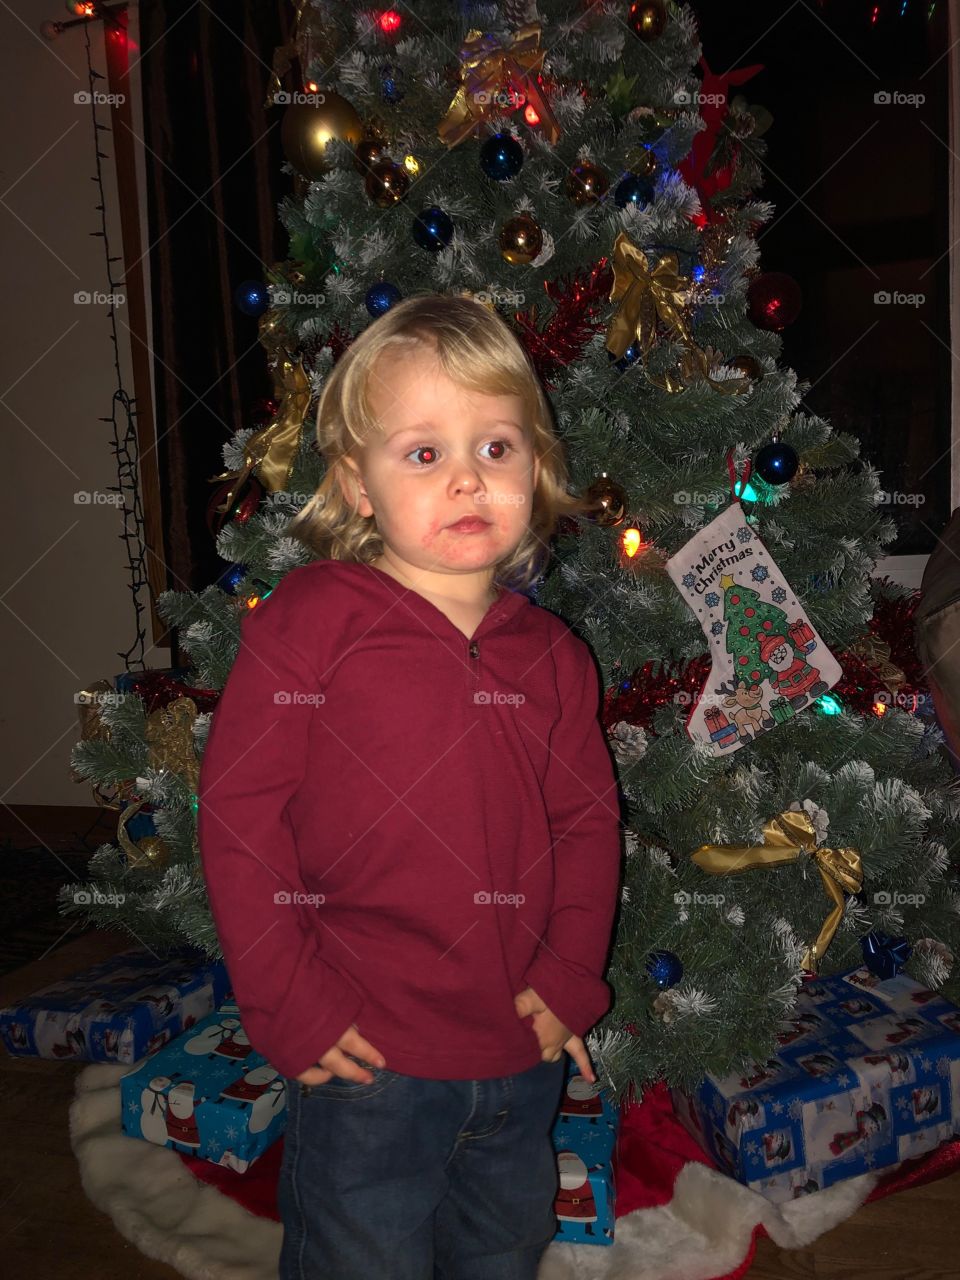 little boy can't wait for Christmas to come